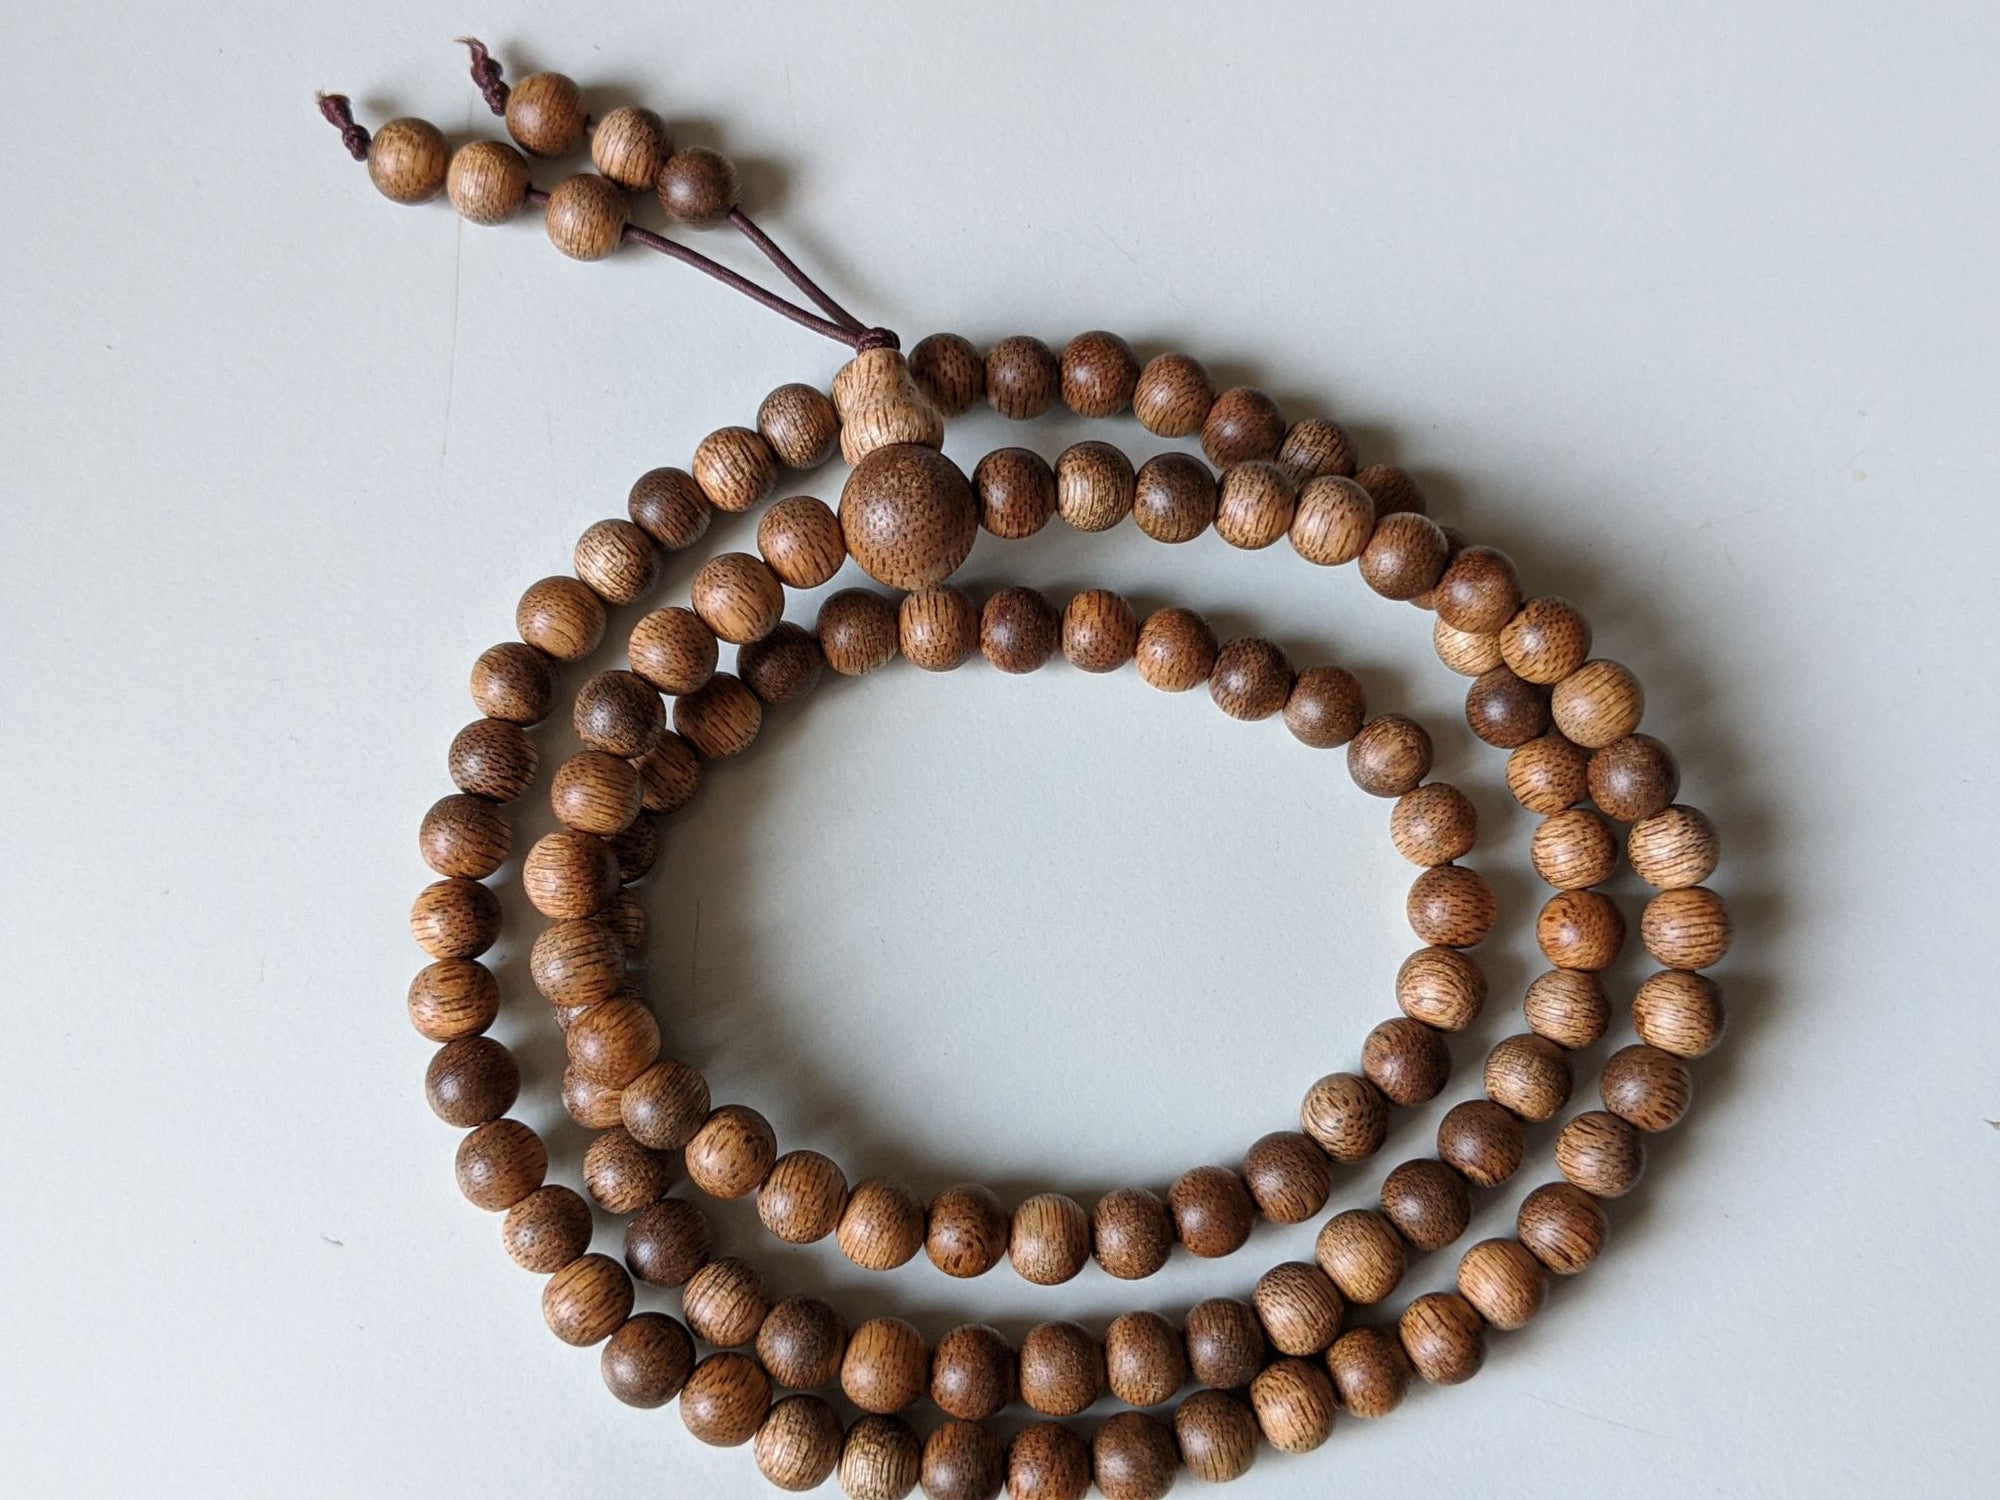 The GGG, Premium Cultivated Agarwood 108 Mala and/or Bracelet - Cultivated beads with wild agarwood quality -